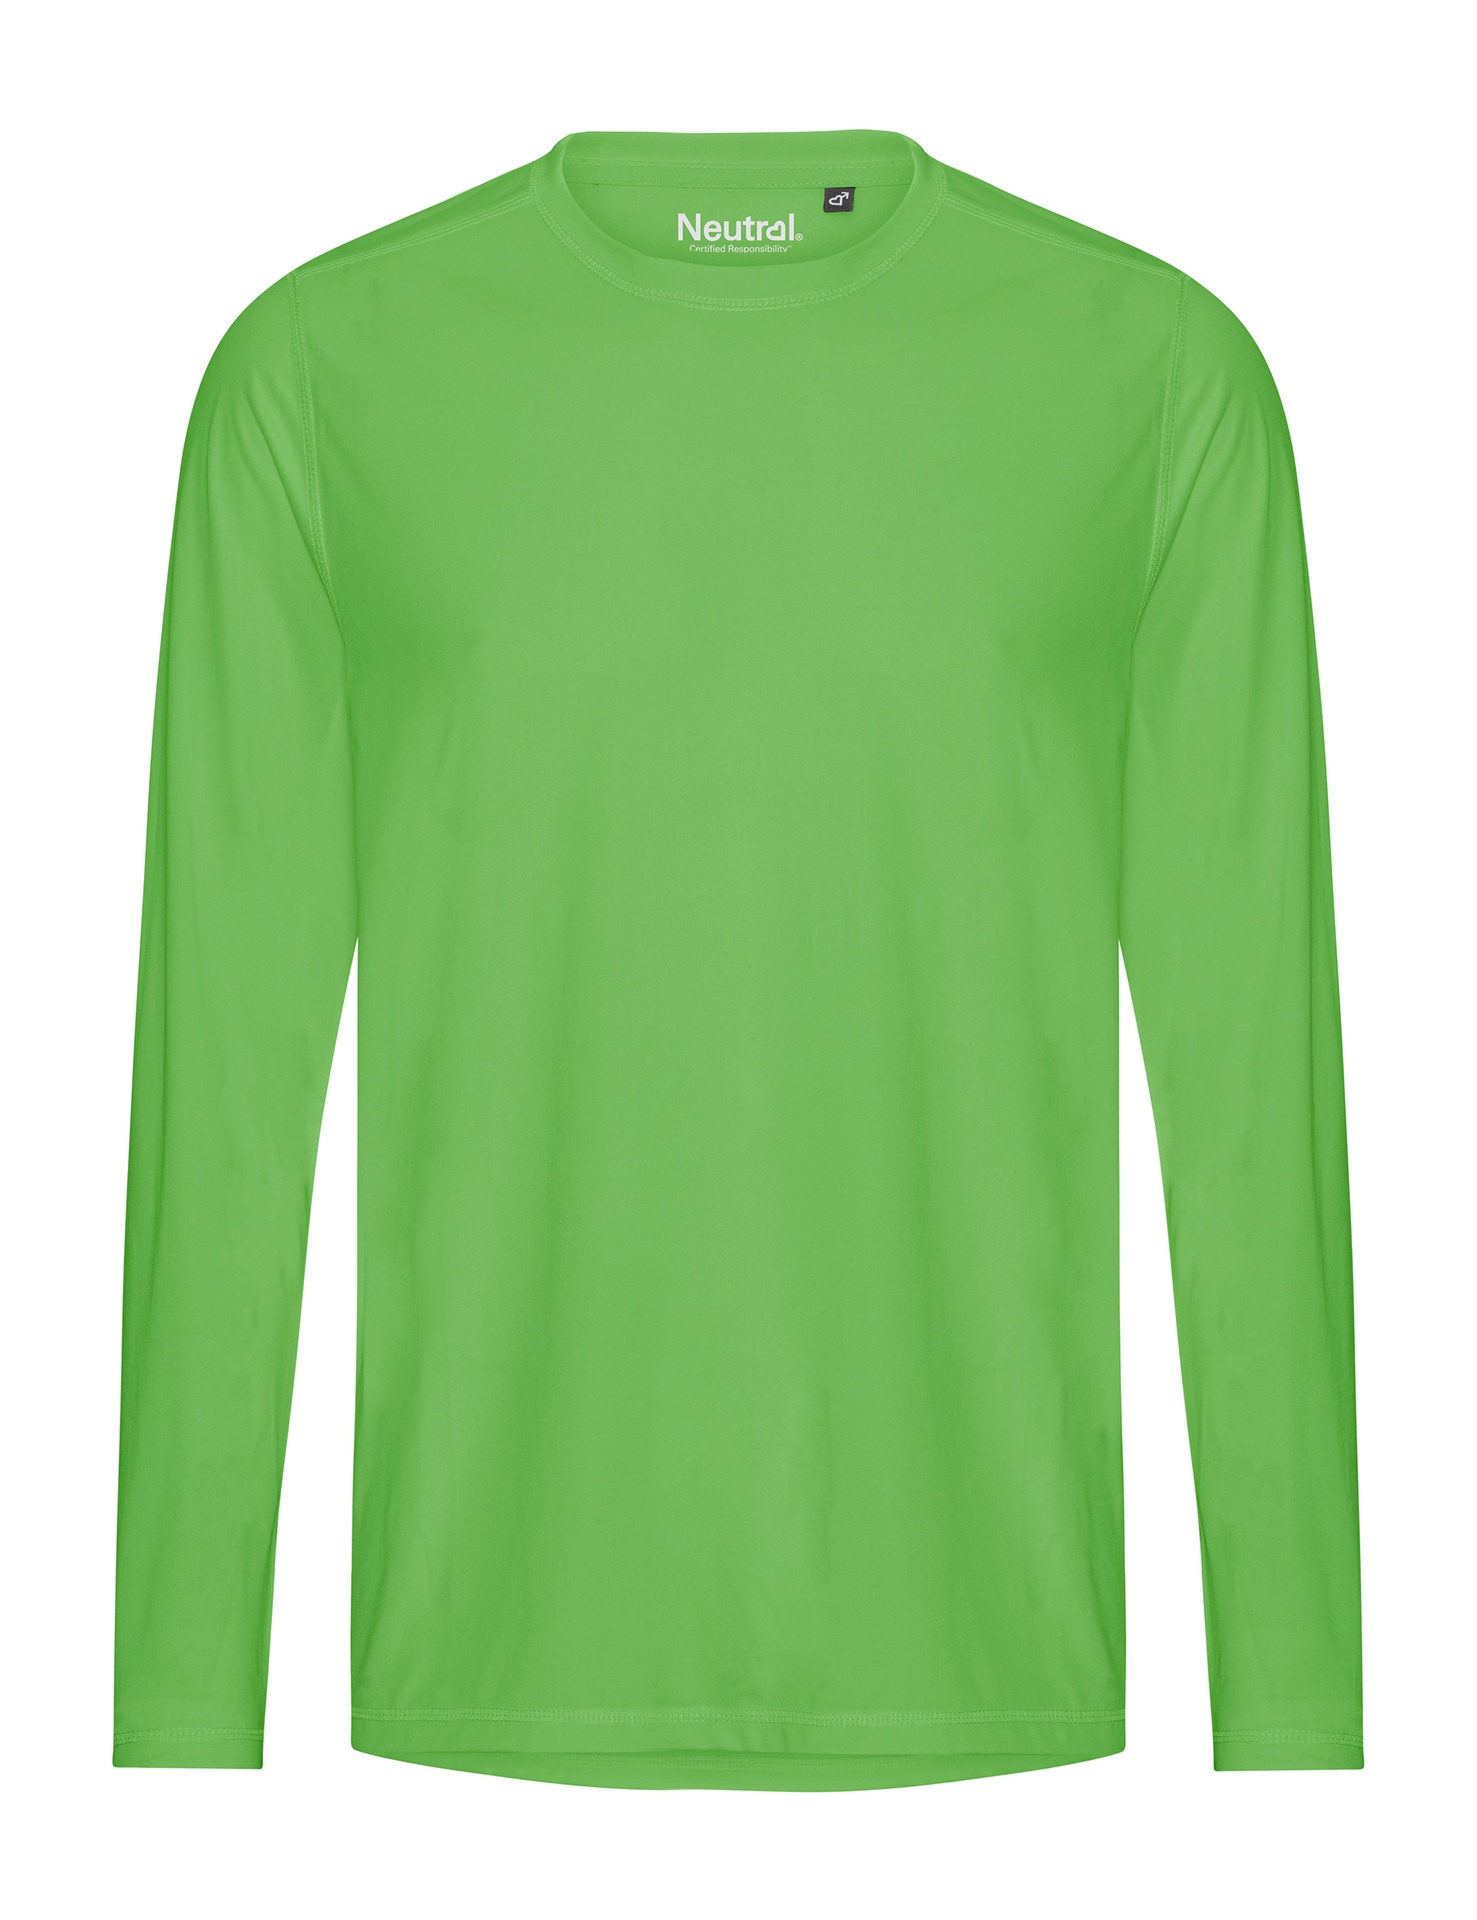 [PR/03839] Recycled Performance LS T-Shirt (Lime 12, M)